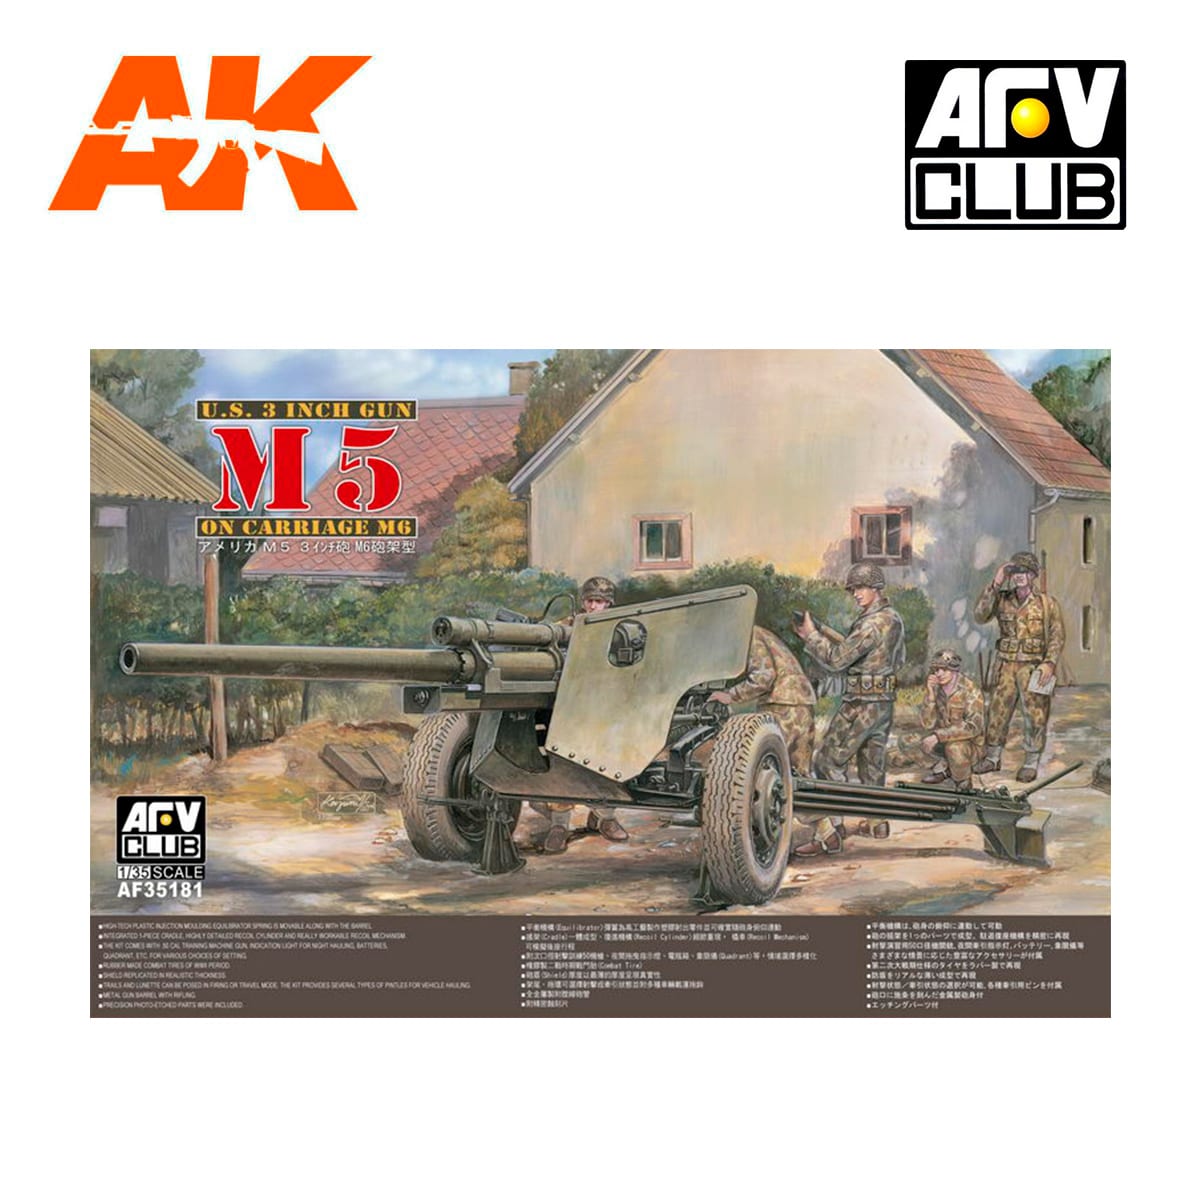 3 INCH GUN M5 AND CARRIAGE M6 1/35